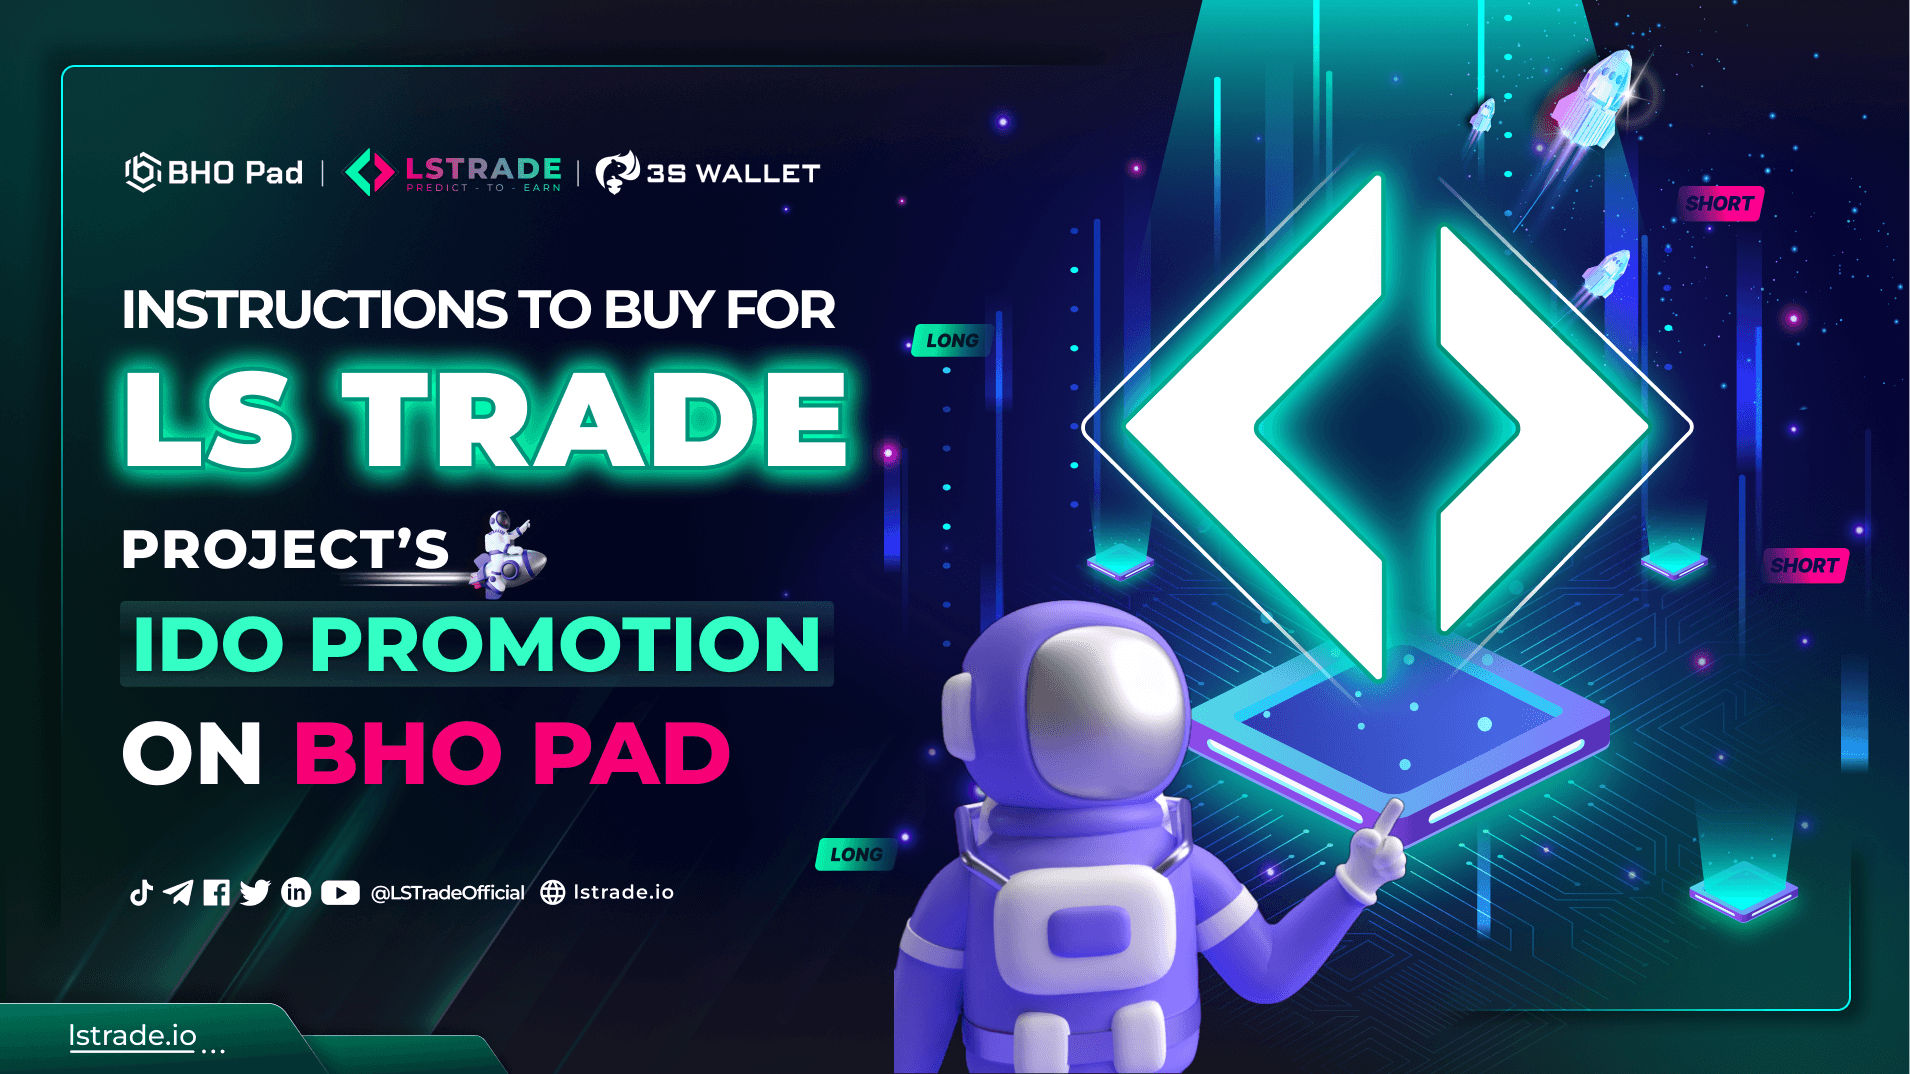 INSTRUCTIONS TO BUY LS TRADE PROJECT’S IDO PROMOTION ON BHO PAD